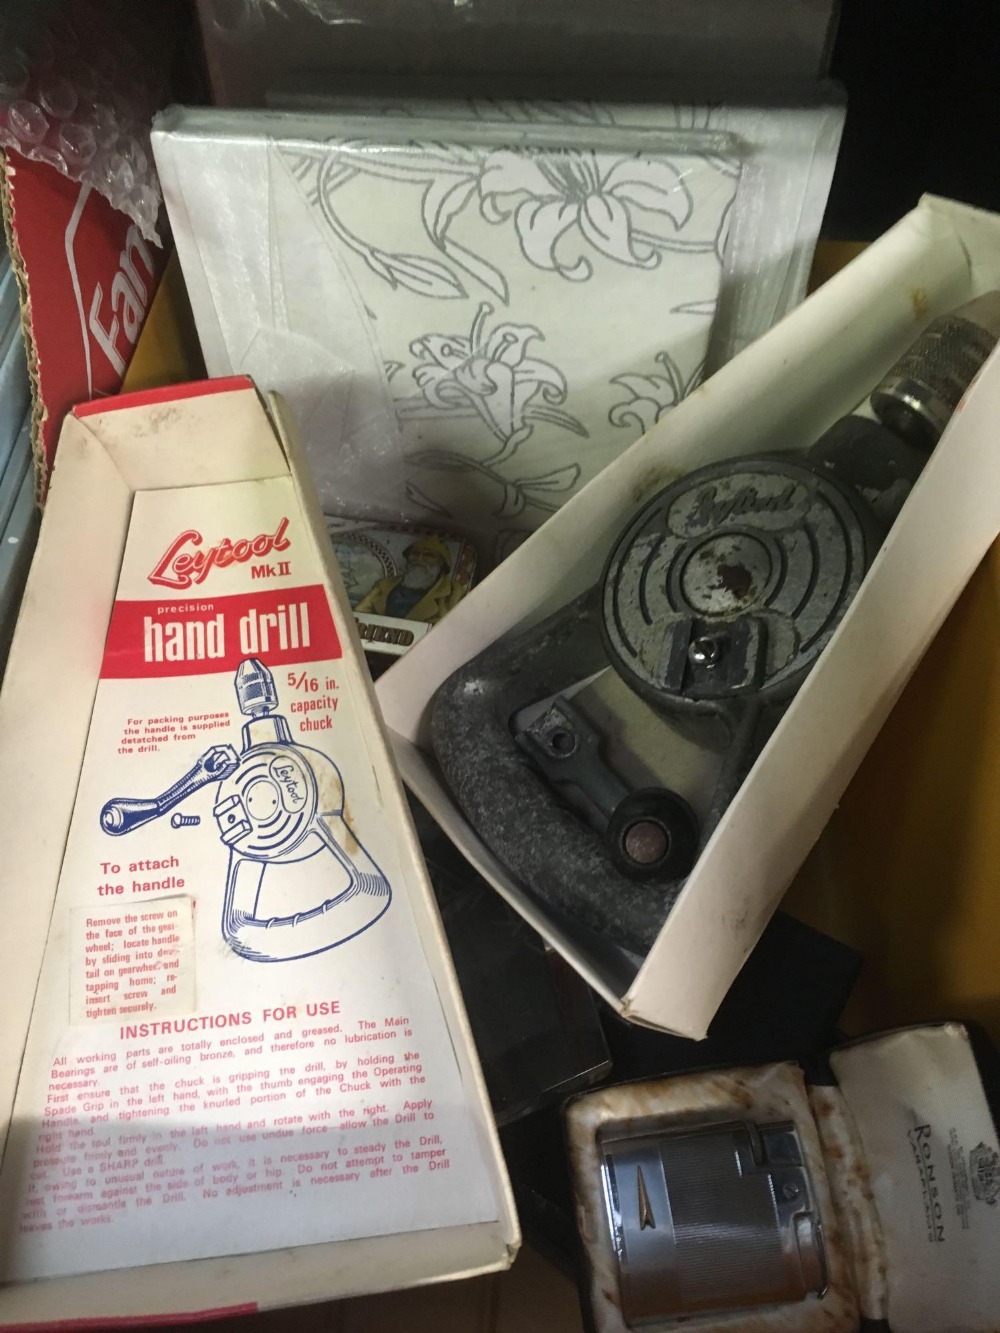 2 CARTONS WITH VARIOUS GIFT BAGS, HAND DRILL, BOXED ASHTRAY & CIGARETTE LIGHTERS - Image 4 of 5